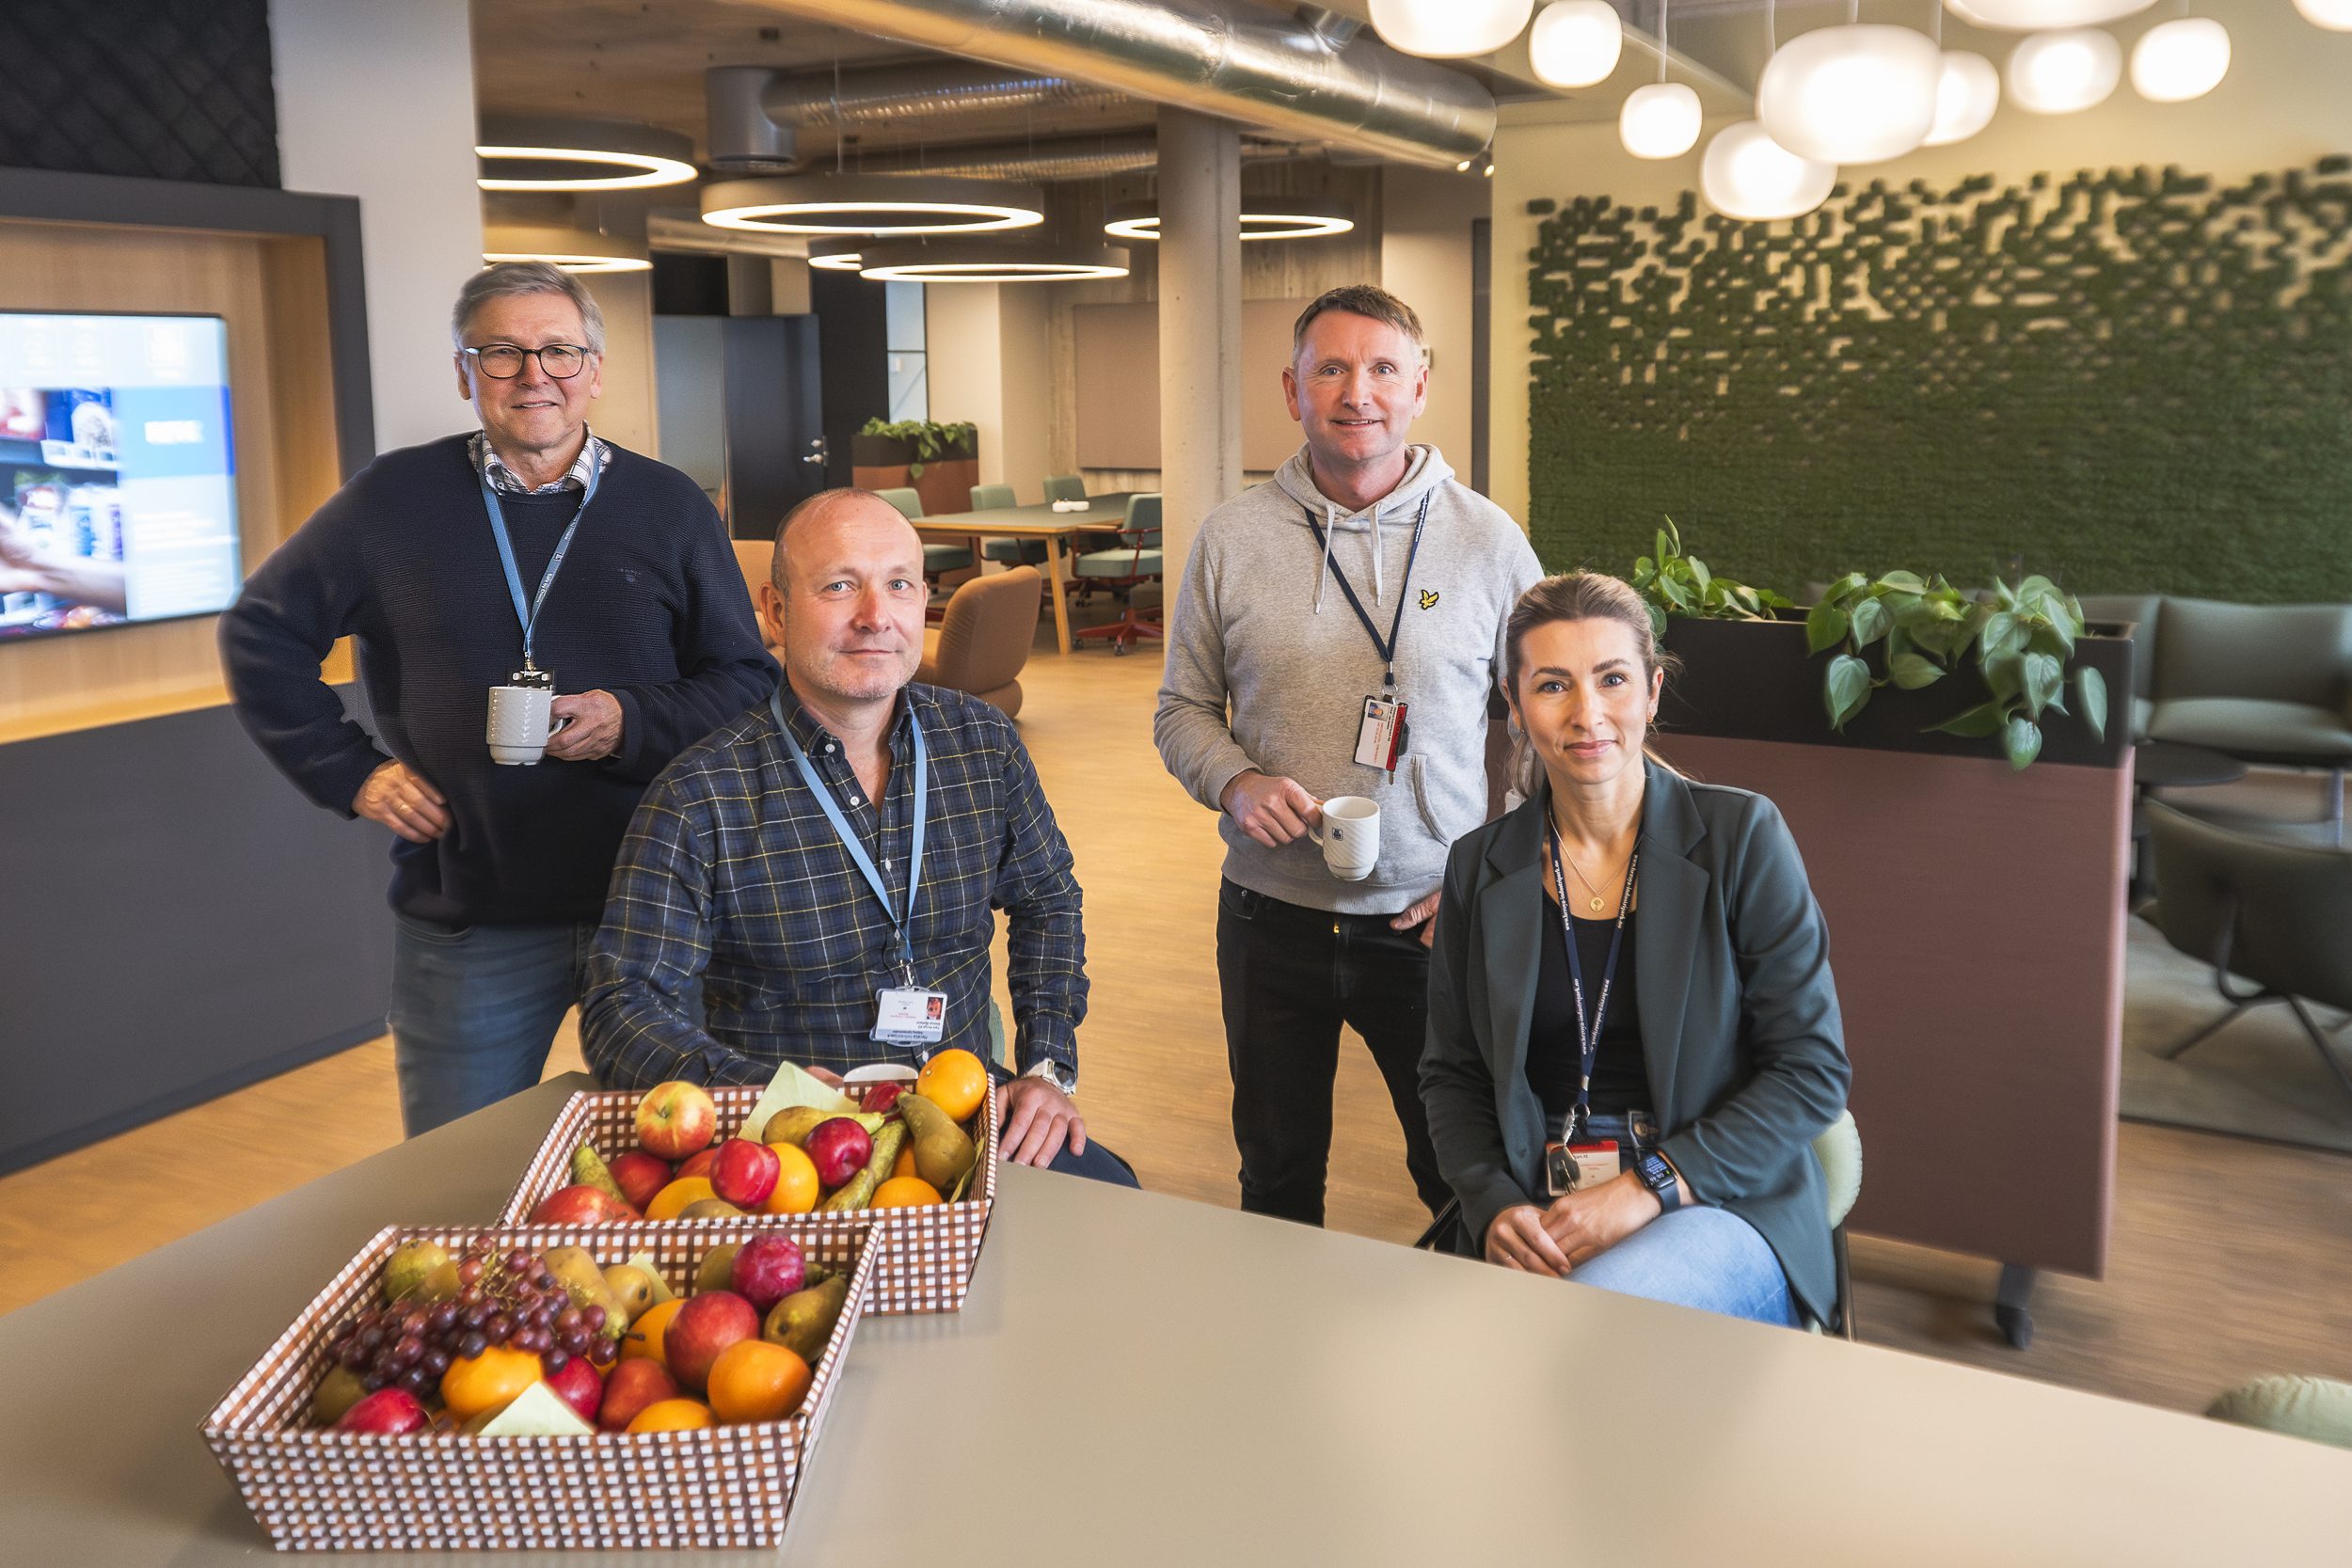 office environment, four persons, posing, standing and sitting by a high table. Fruit on the table, green moss on the wall behind. Furniture in background.